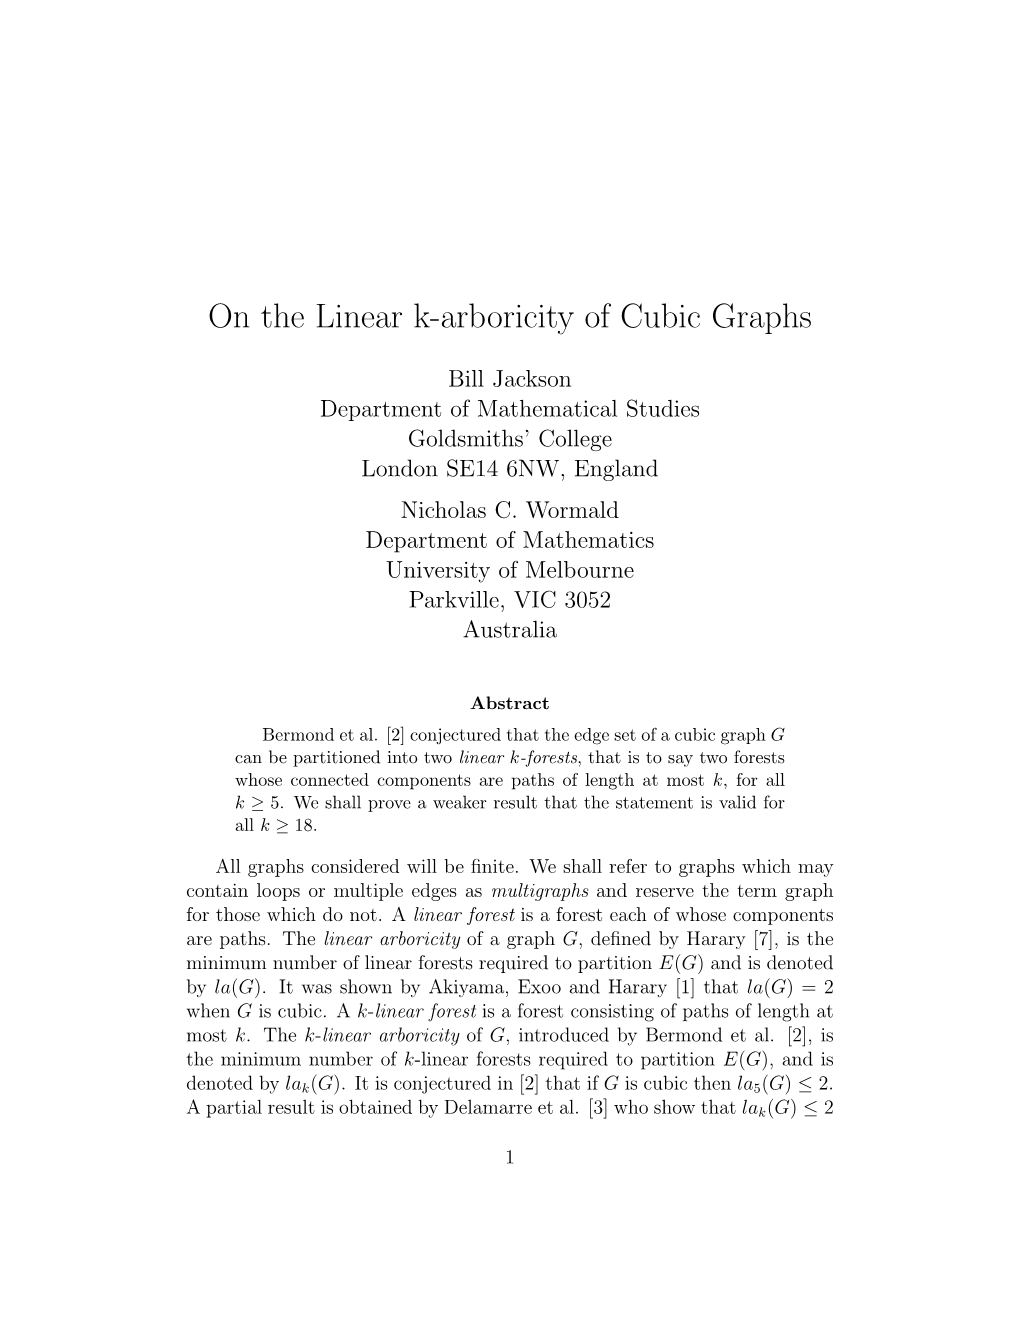 On the Linear K-Arboricity of Cubic Graphs